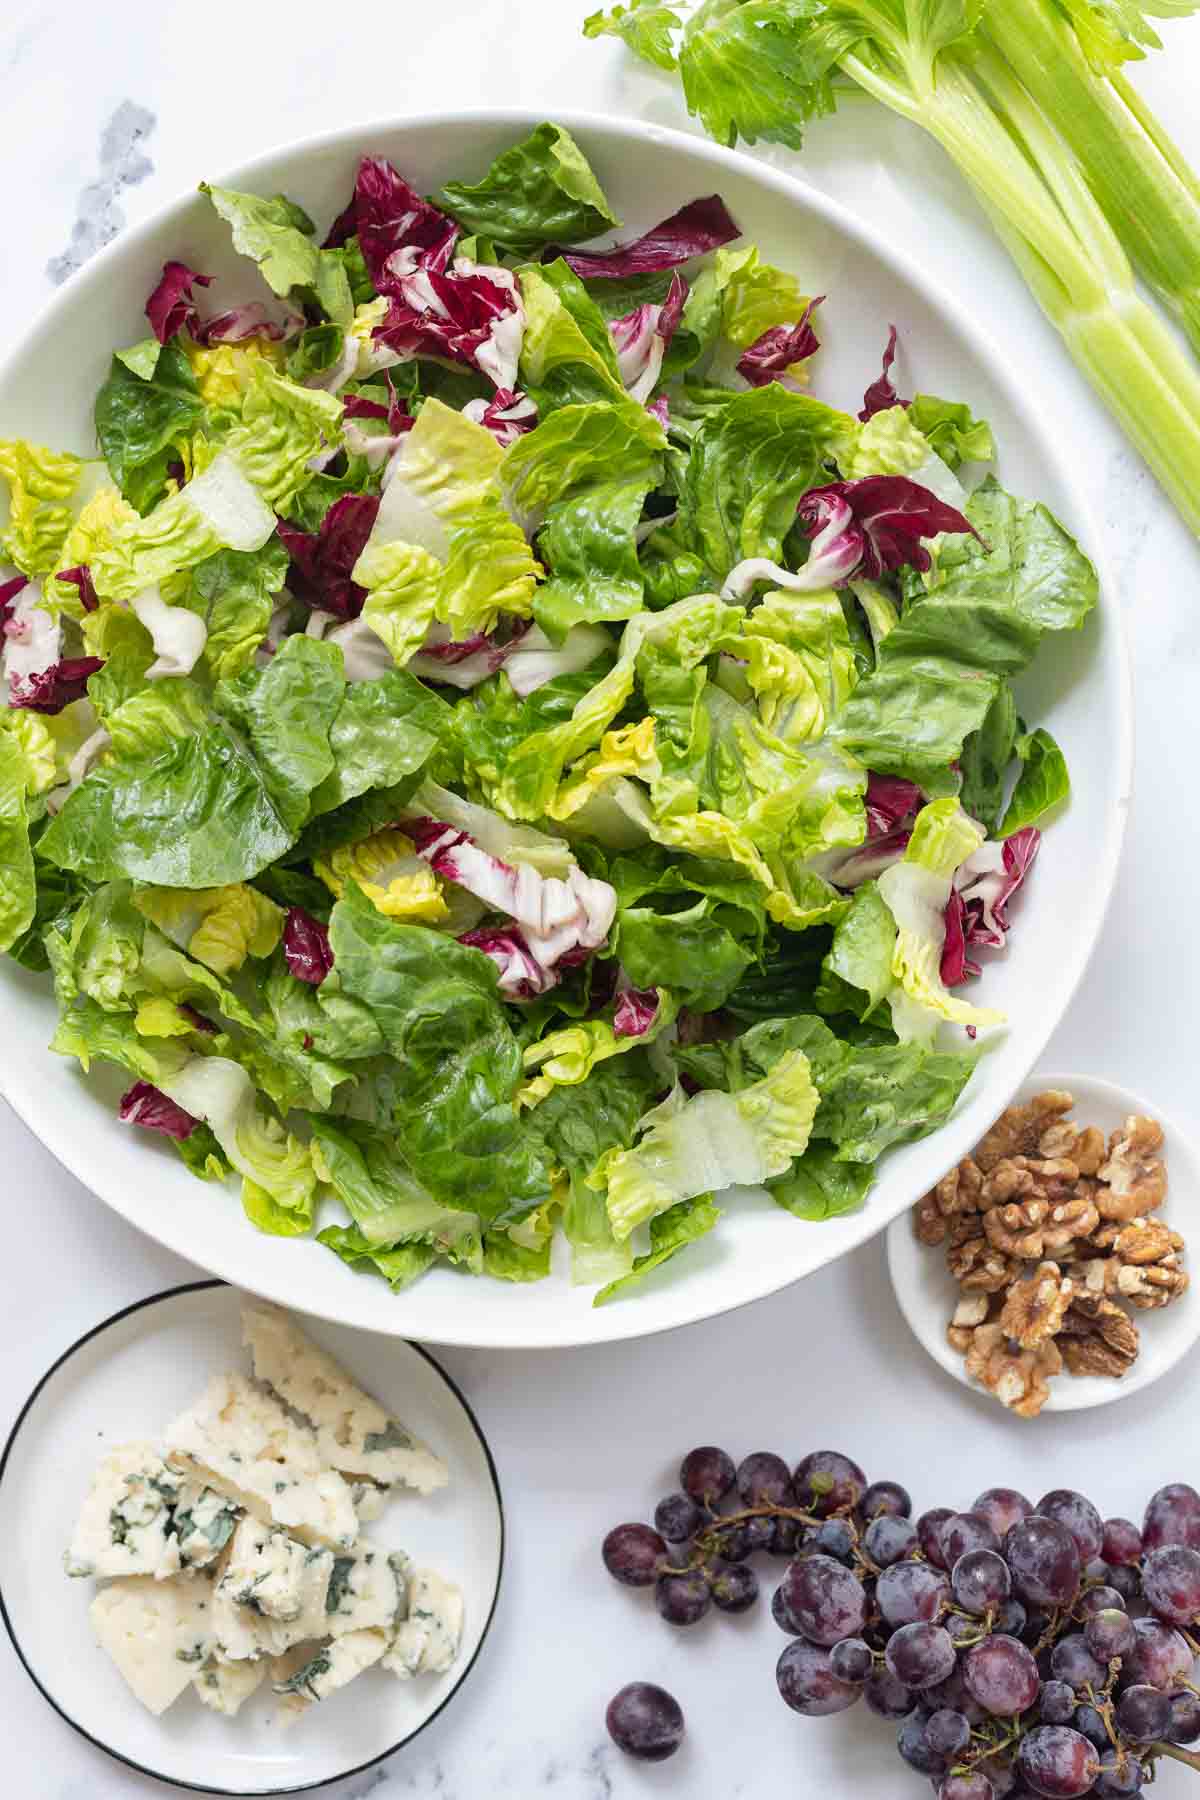 Salad with Red Grapes, Walnuts & Blue Cheese Dressing ingredients